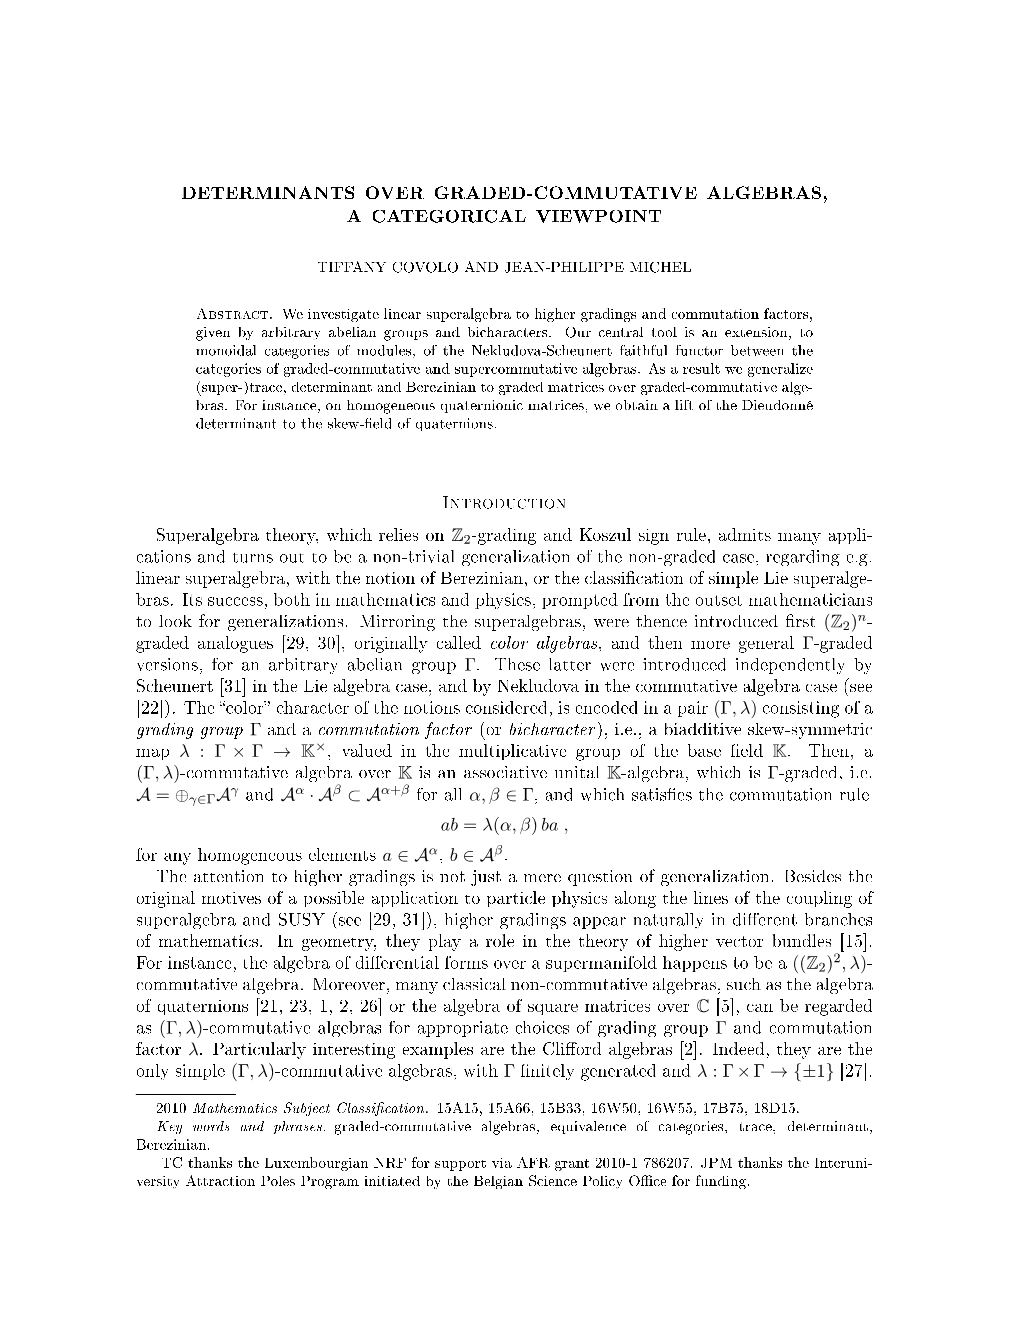 Determinants Over Graded-Commutative Algebras, a Categorical Viewpoint